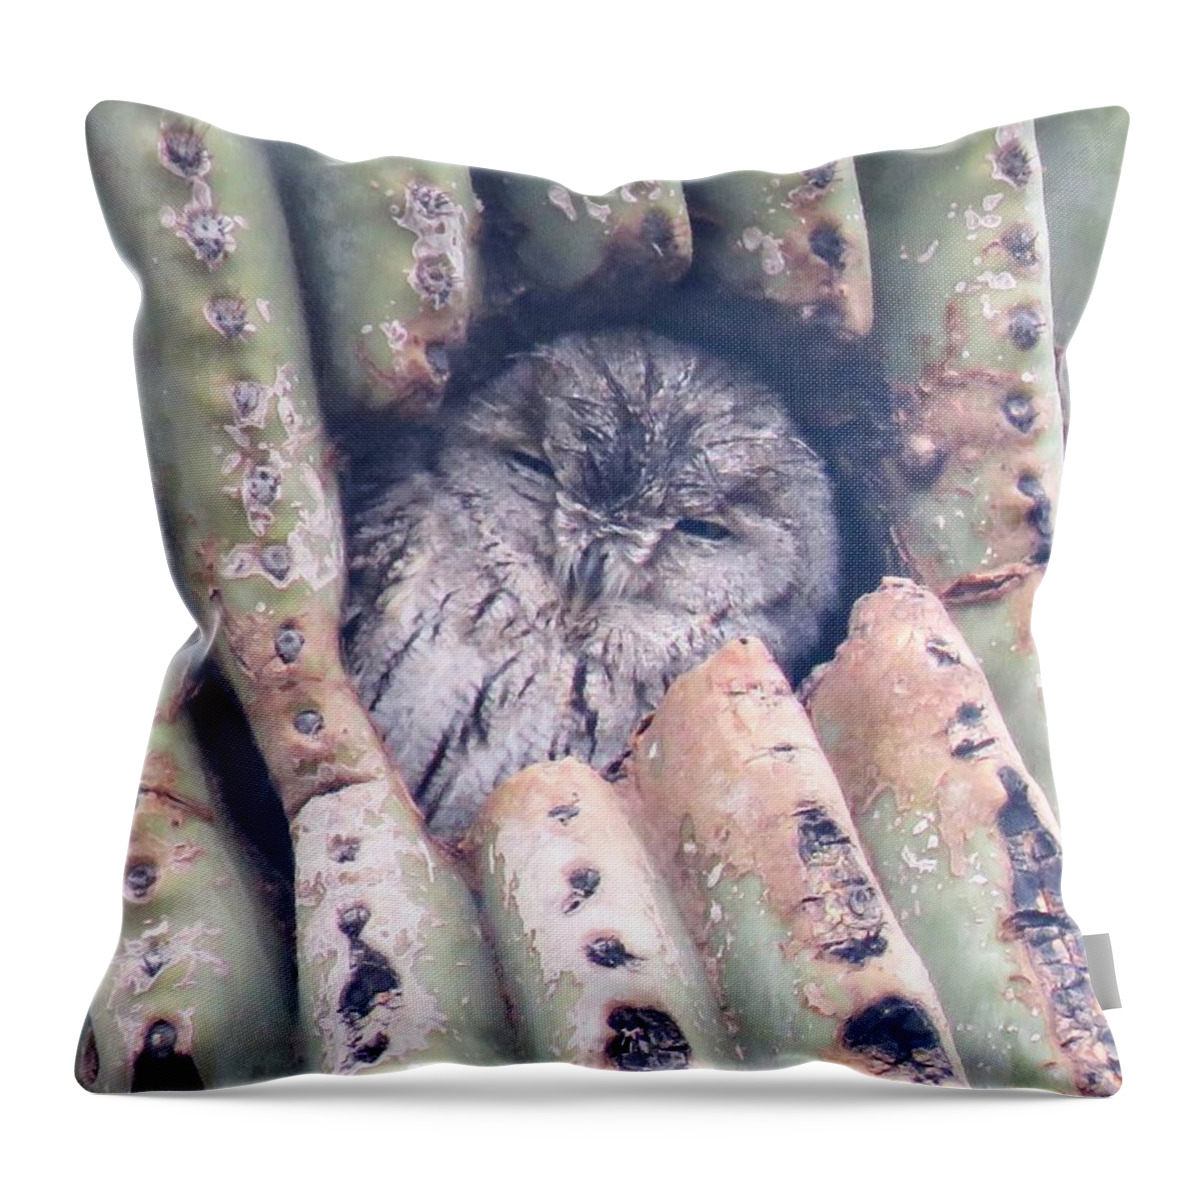 Animals Throw Pillow featuring the photograph Sleepy Eye by Judy Kennedy